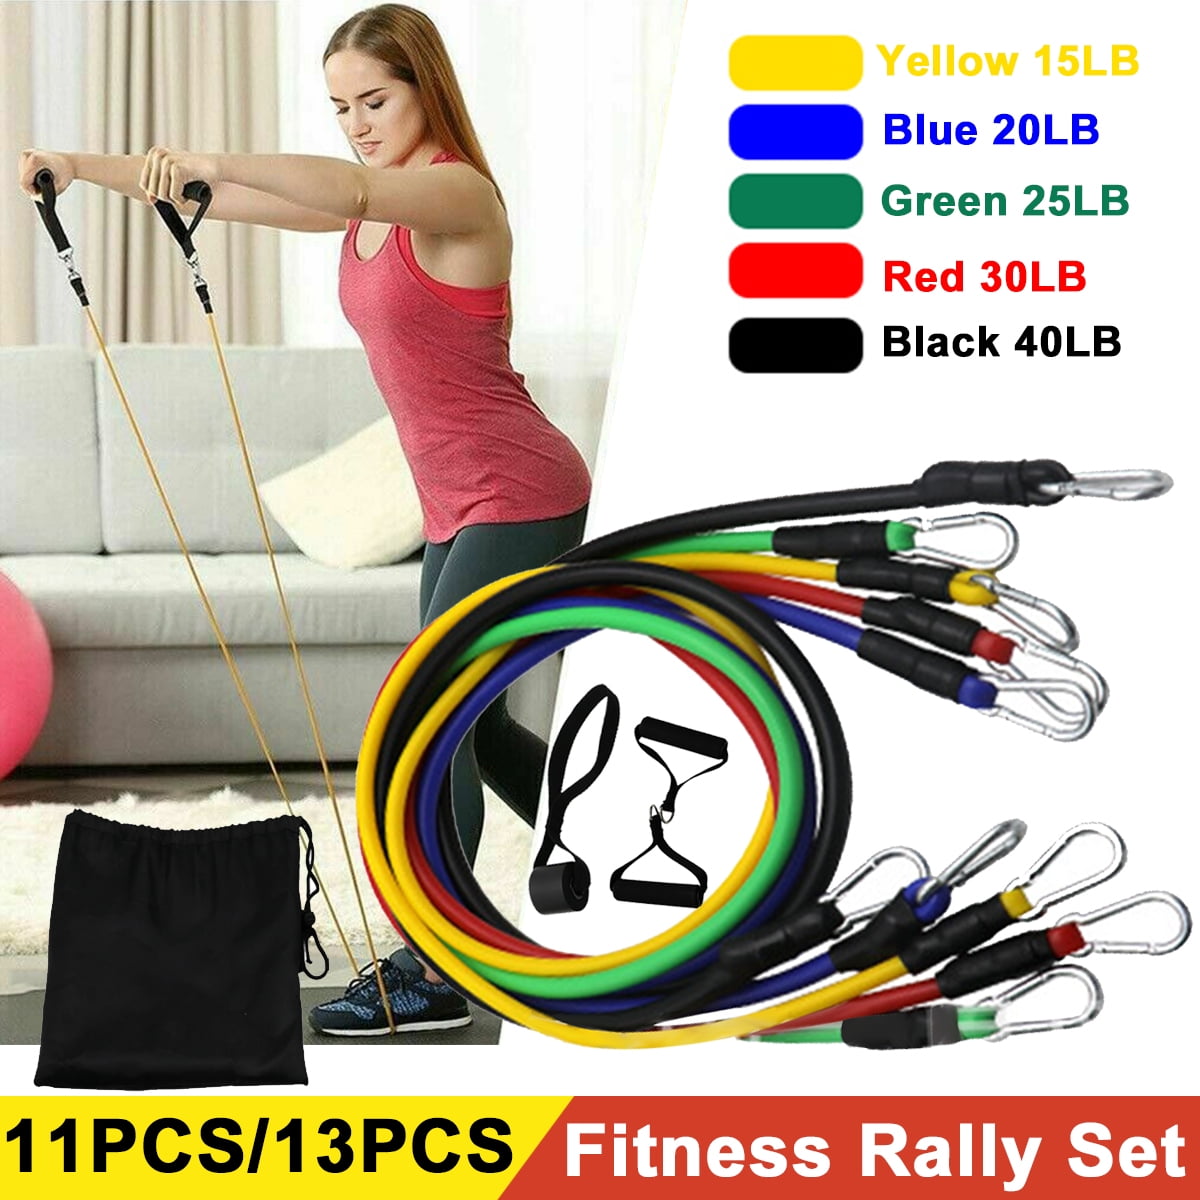 5 Fitness Workout Bands Details about   TheFitLife Exercise Resistance Bands with Handles Tra 